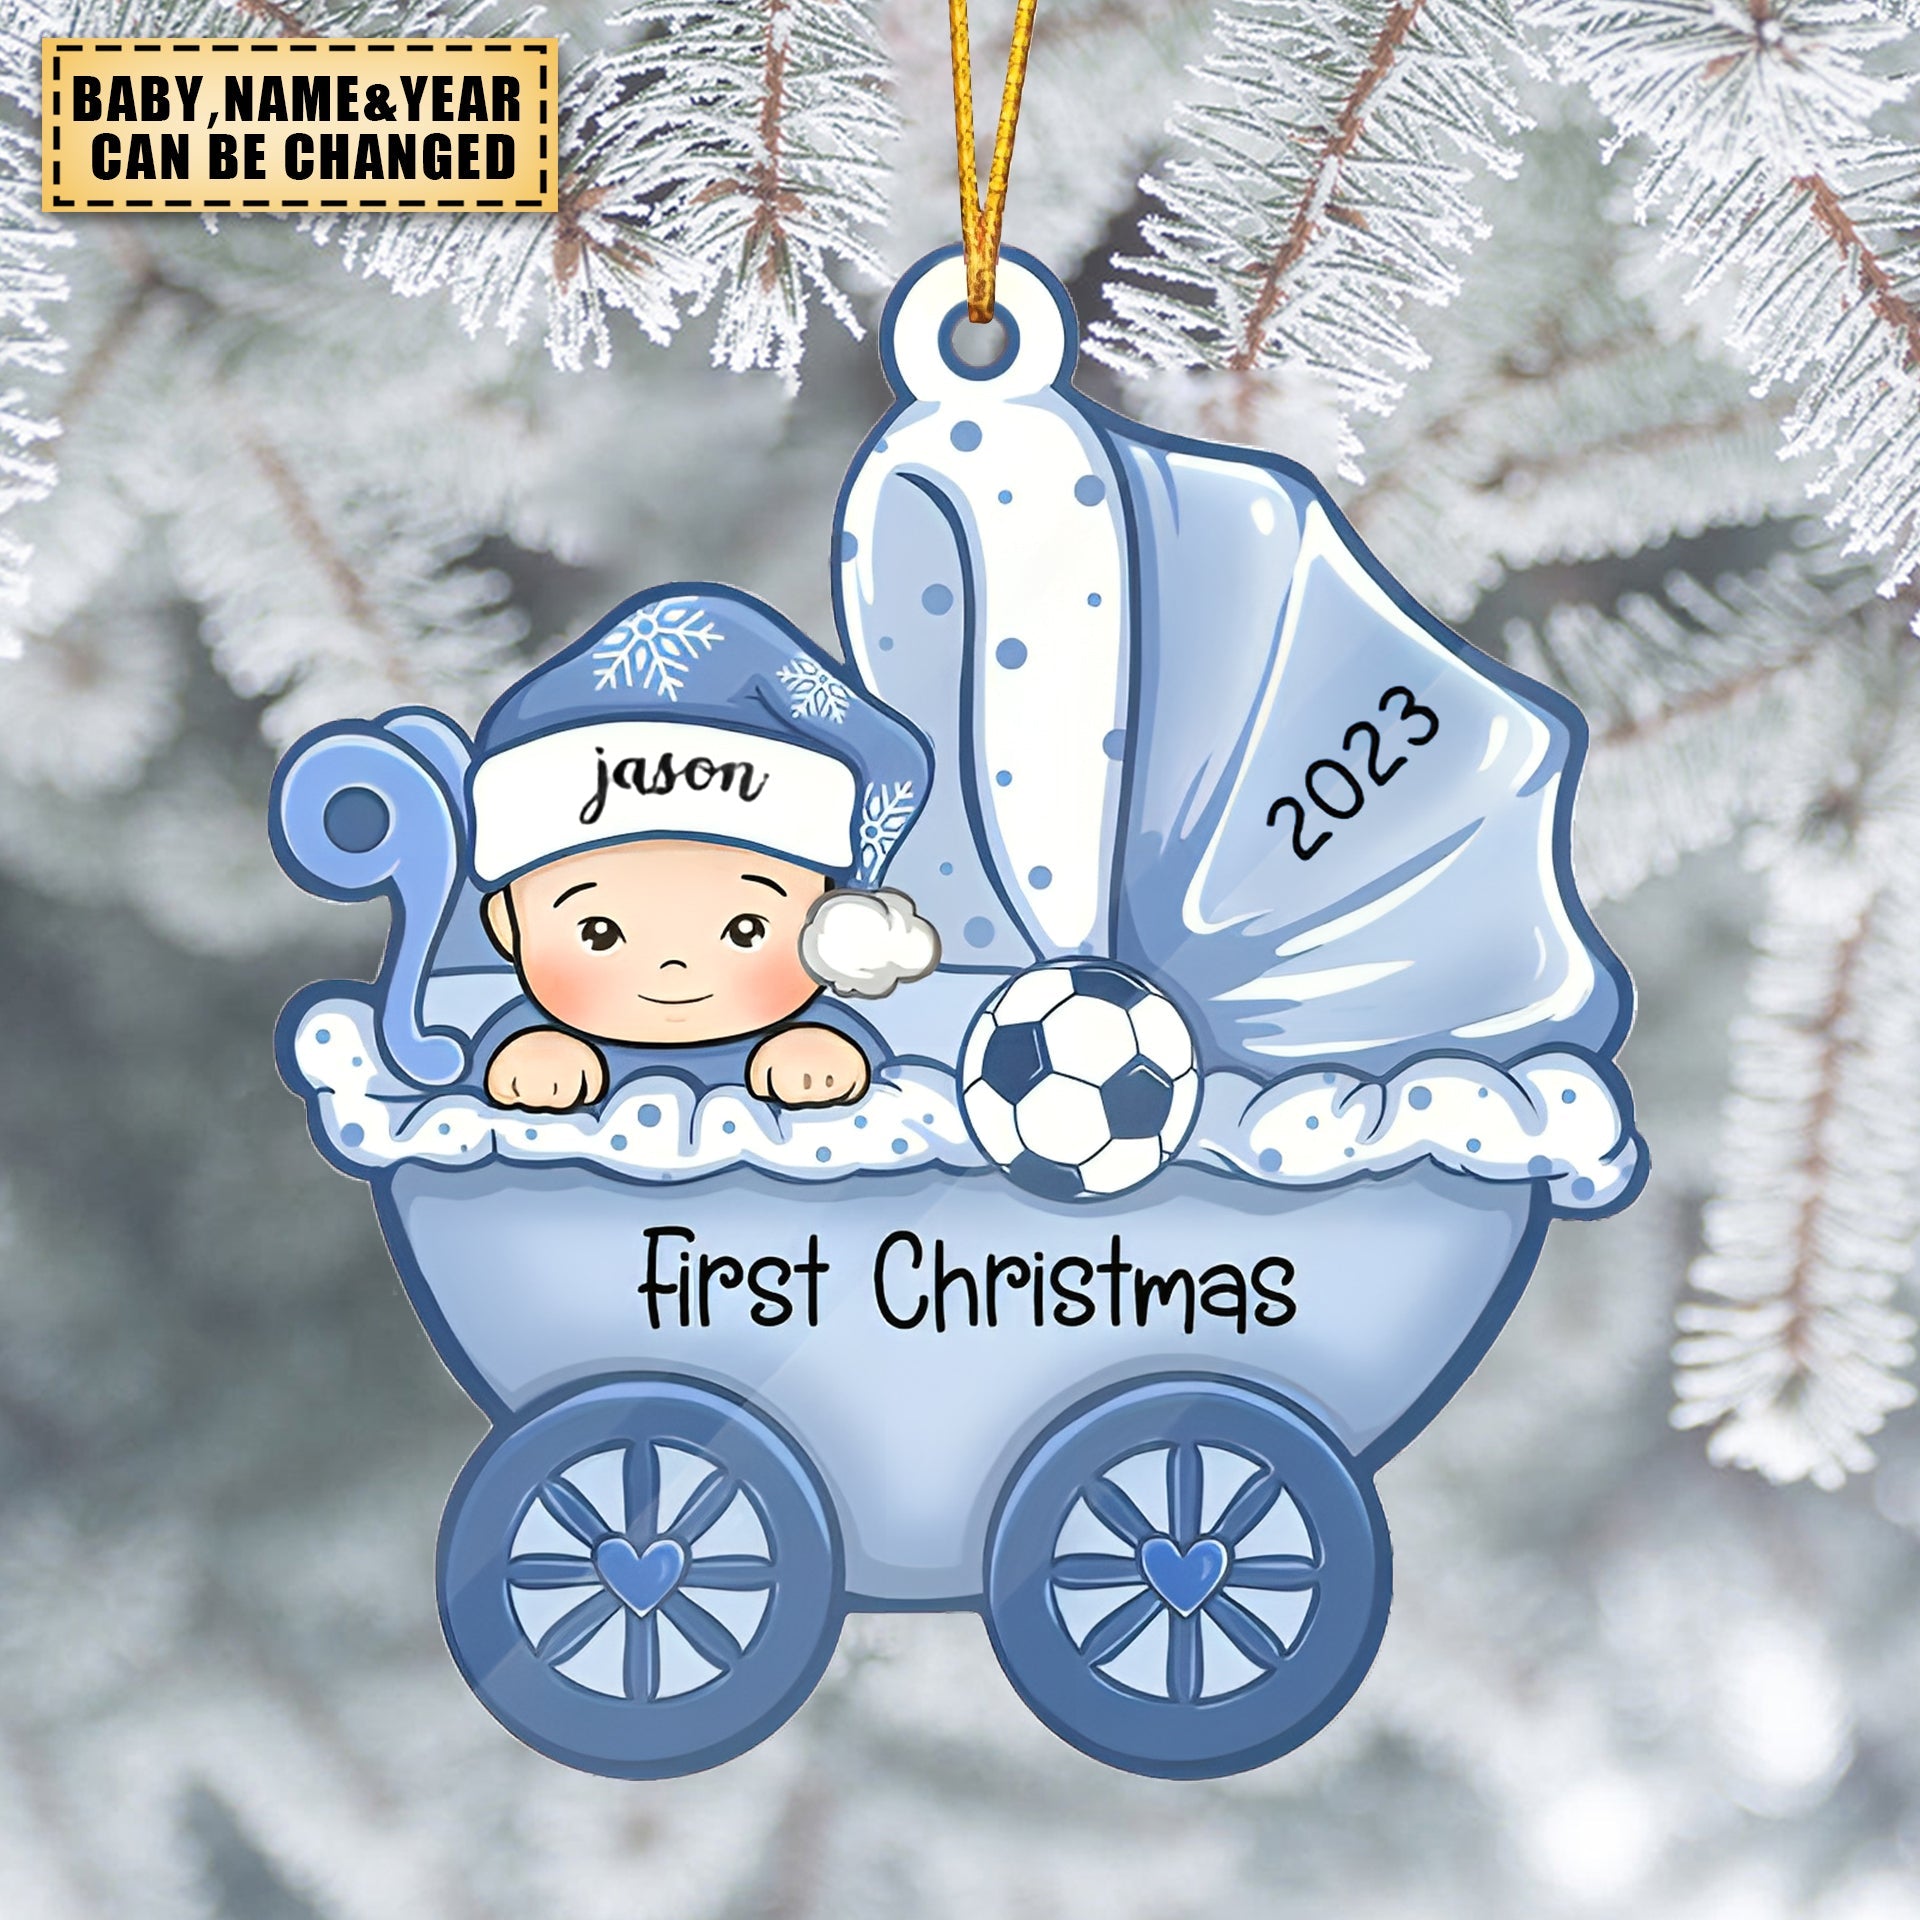 Baby's First Christmas, Baby Carriage, Custom Gift for Baby - Personalized Acrylic Ornament